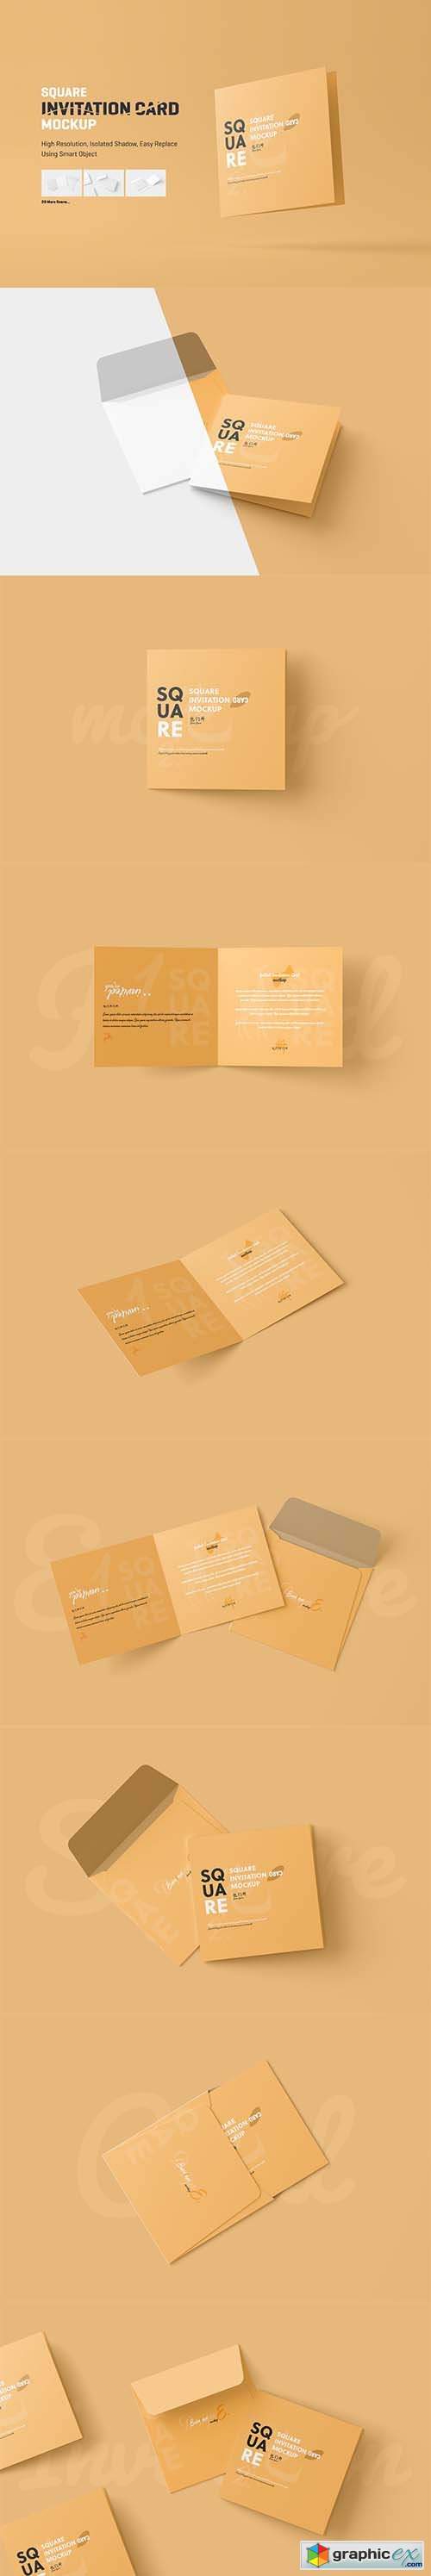 Download Square Folded Invitation Card Mockup Free Download Vector Stock Image Photoshop Icon